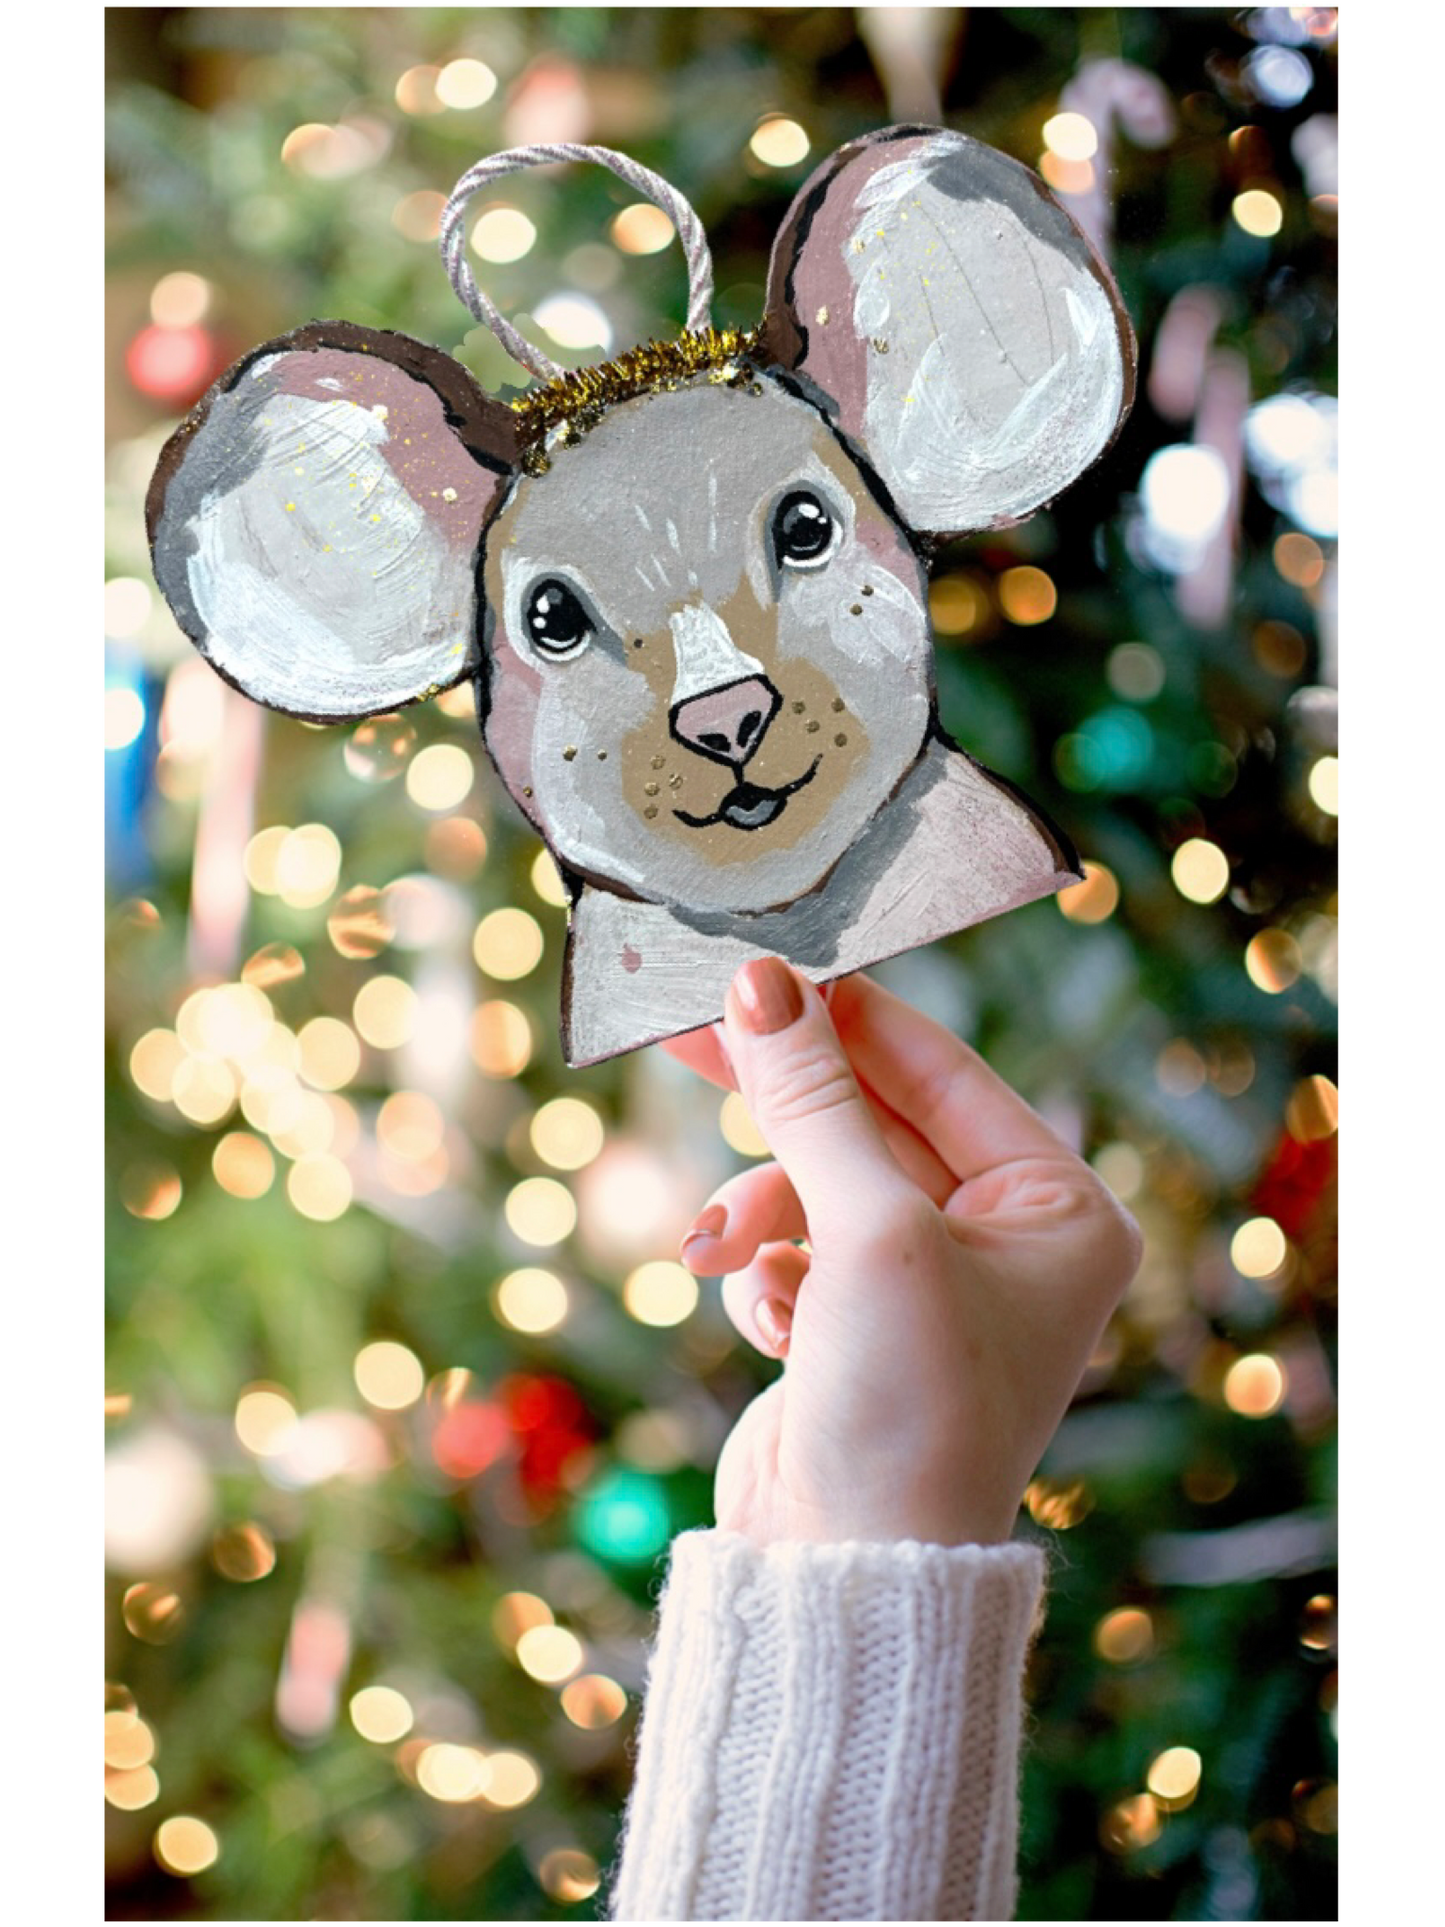 The Mouse King Ornament